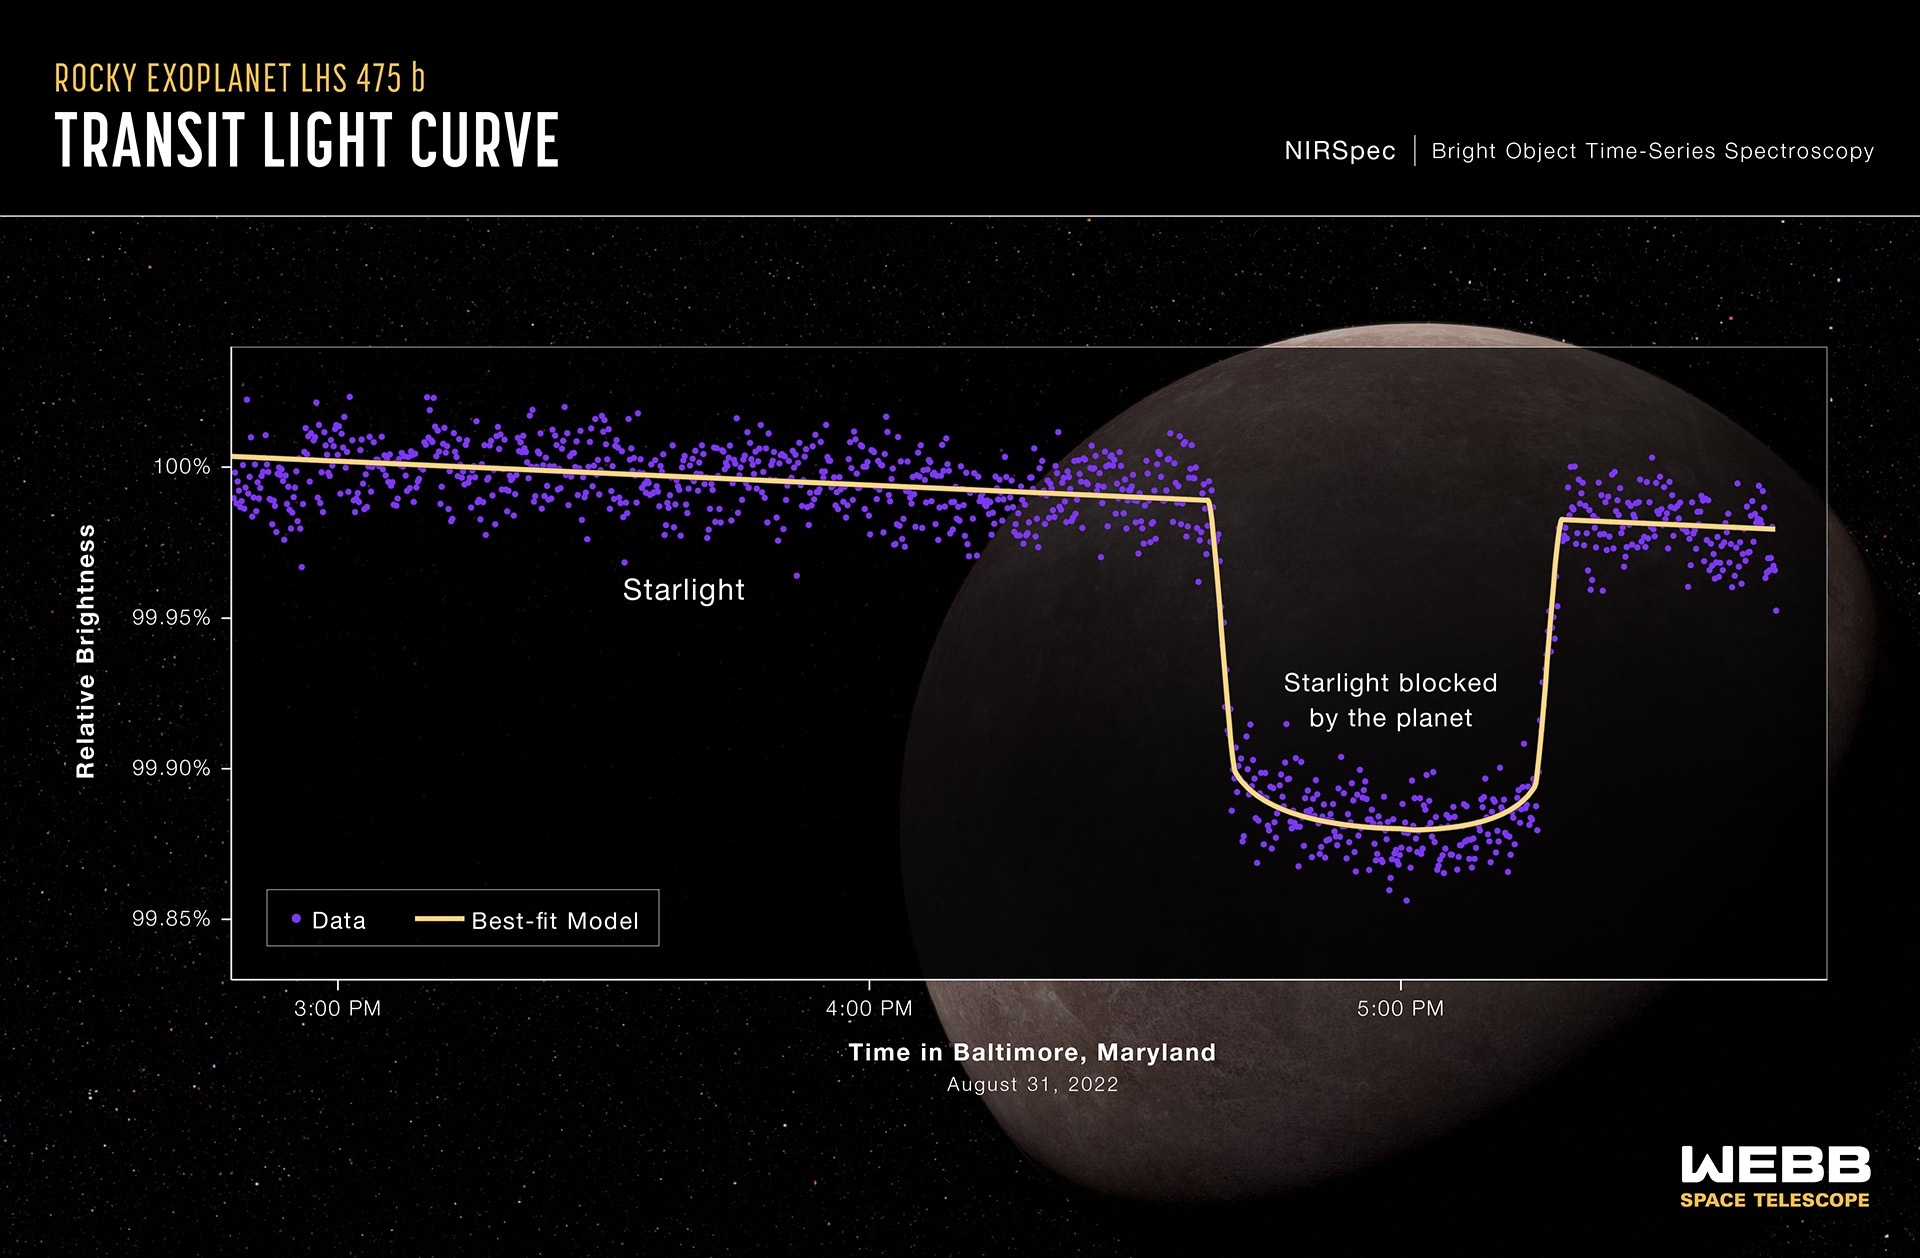 Graphic titled “Rocky Exoplanet LHS 475 b Transit Light Curve, NIRSpec Bright Object Time-Series Spectroscopy.” Behind the graph is an illustration of the planet and its star. 